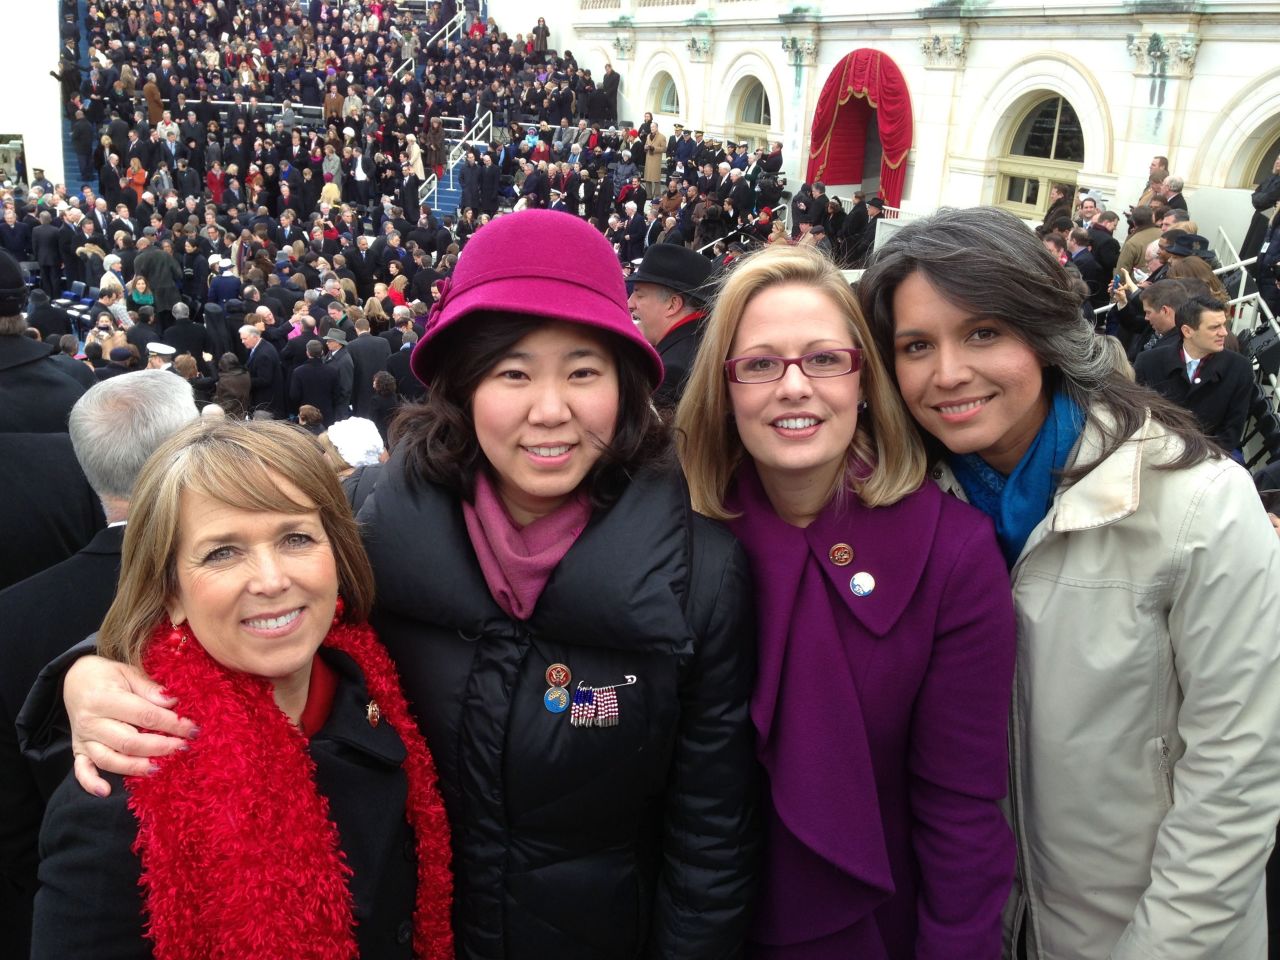 Freshman Congresswoman Grace Meng, D-New York, shared a photo of herself with some of her fellow female freshmen. From left: Rep. Michelle Lujan Grisham, D-New Mexico; Meng; Rep. Kyrsten Sinema, D-Arizona; and Rep. Tulsi Gabbard, D-Hawaii. "It was really emotional for us freshmen," said Meng, who uploaded this photo to CNN iReport.